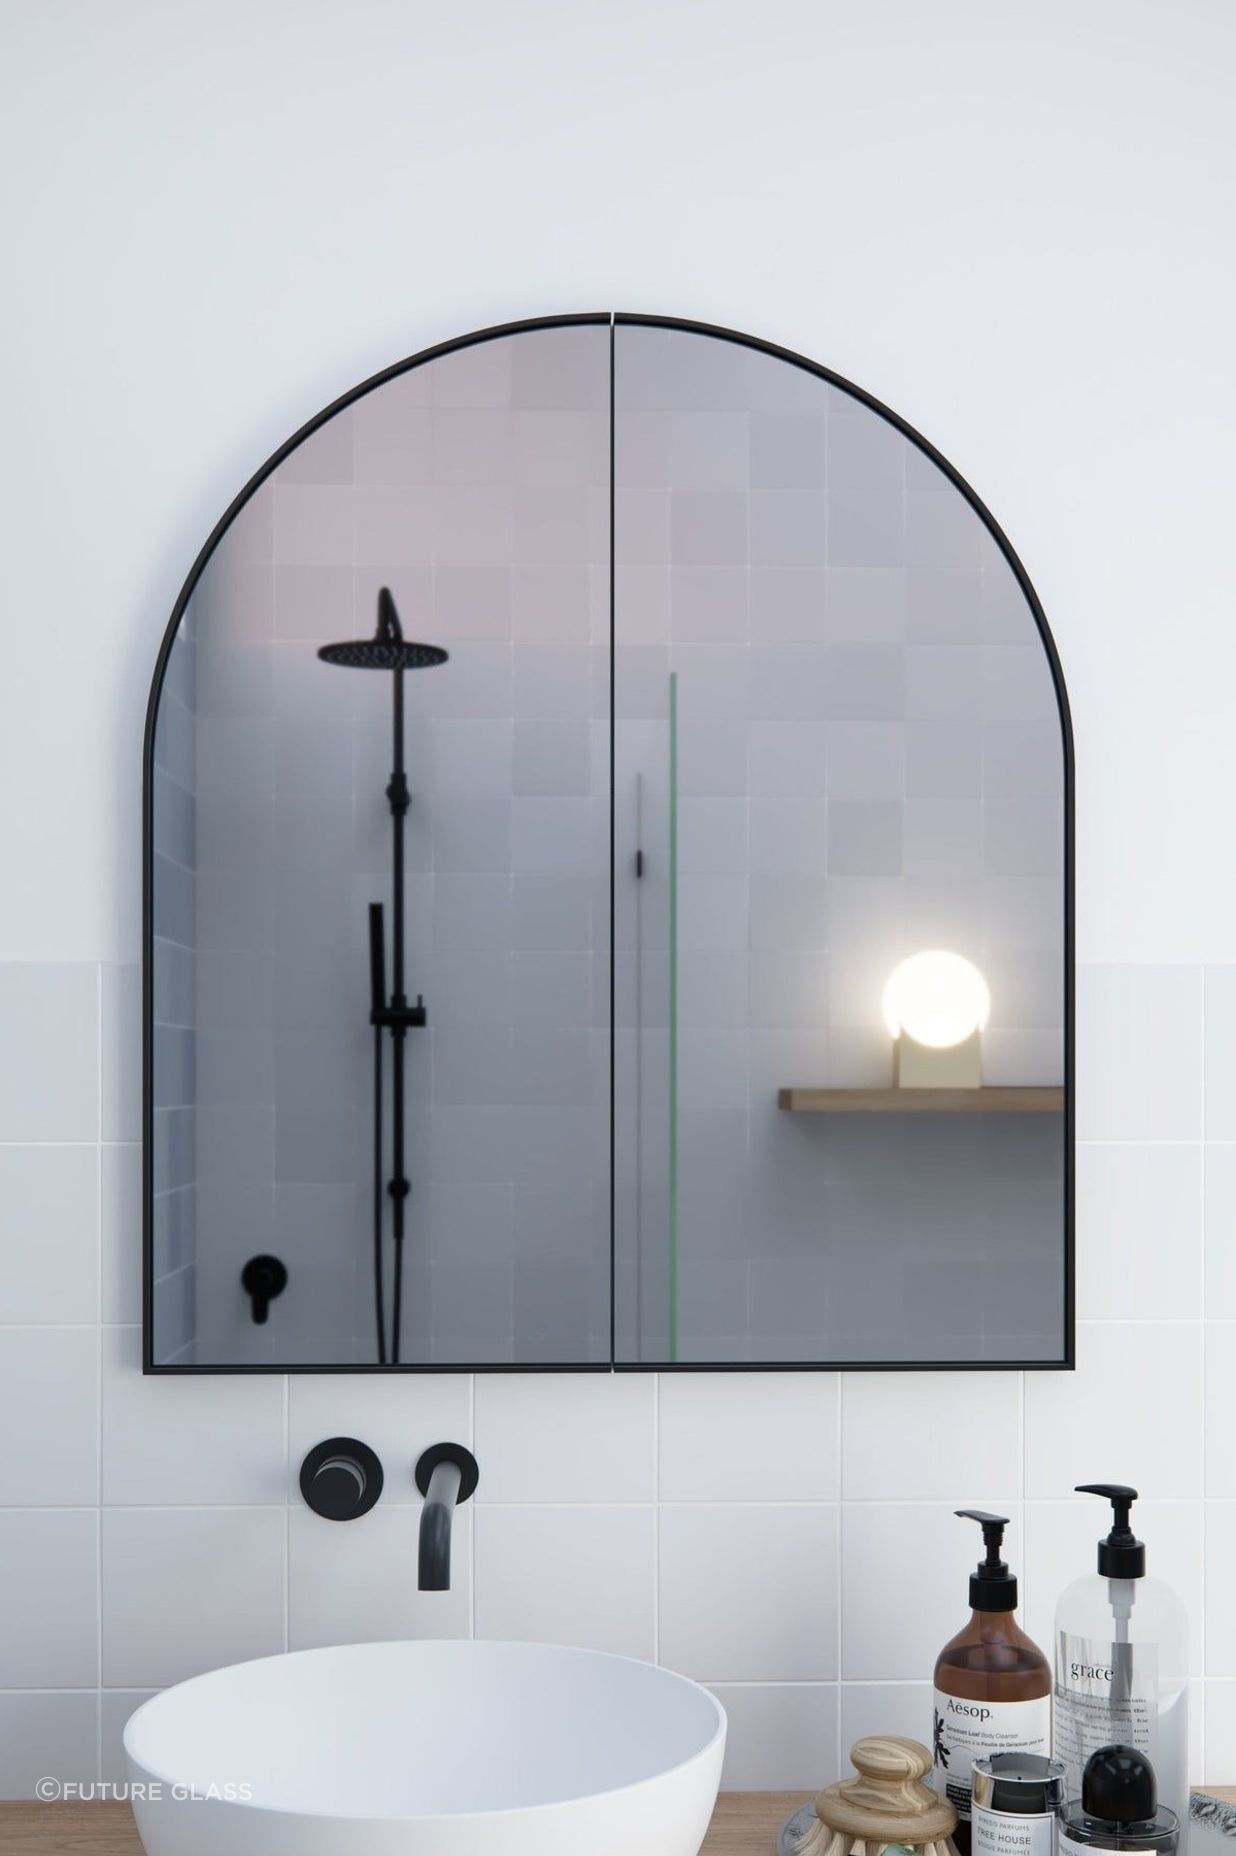 Arch mirrors have a traditional feel, but they work well in modern bathrooms. Featured product: Arch Mirror Cabinet